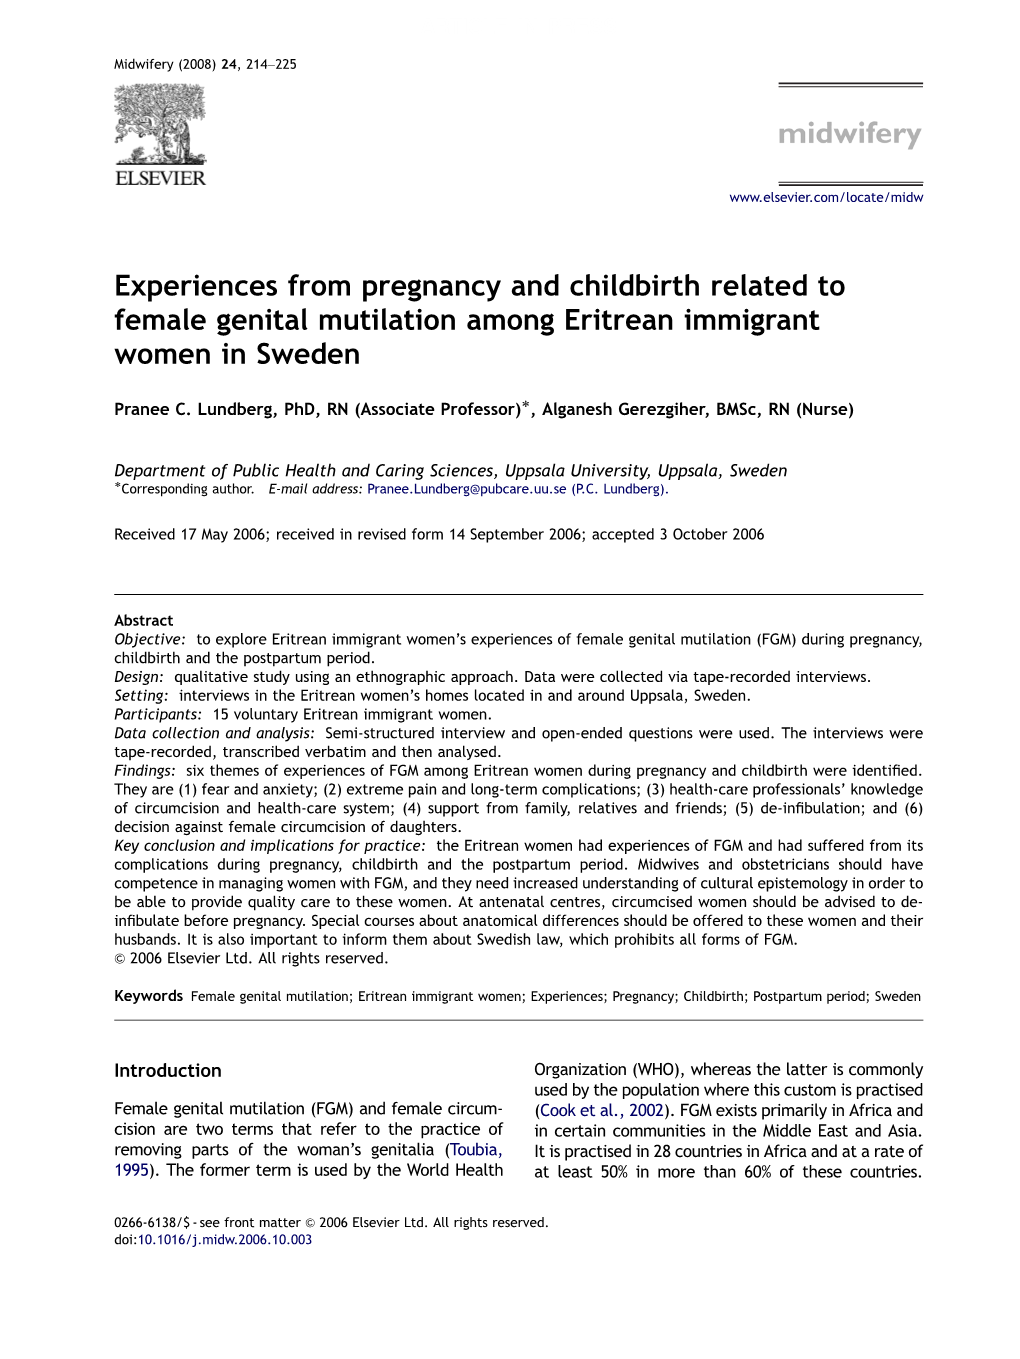 Experiences from Pregnancy and Childbirth Related to Female Genital Mutilation Among Eritrean Immigrant Women in Sweden